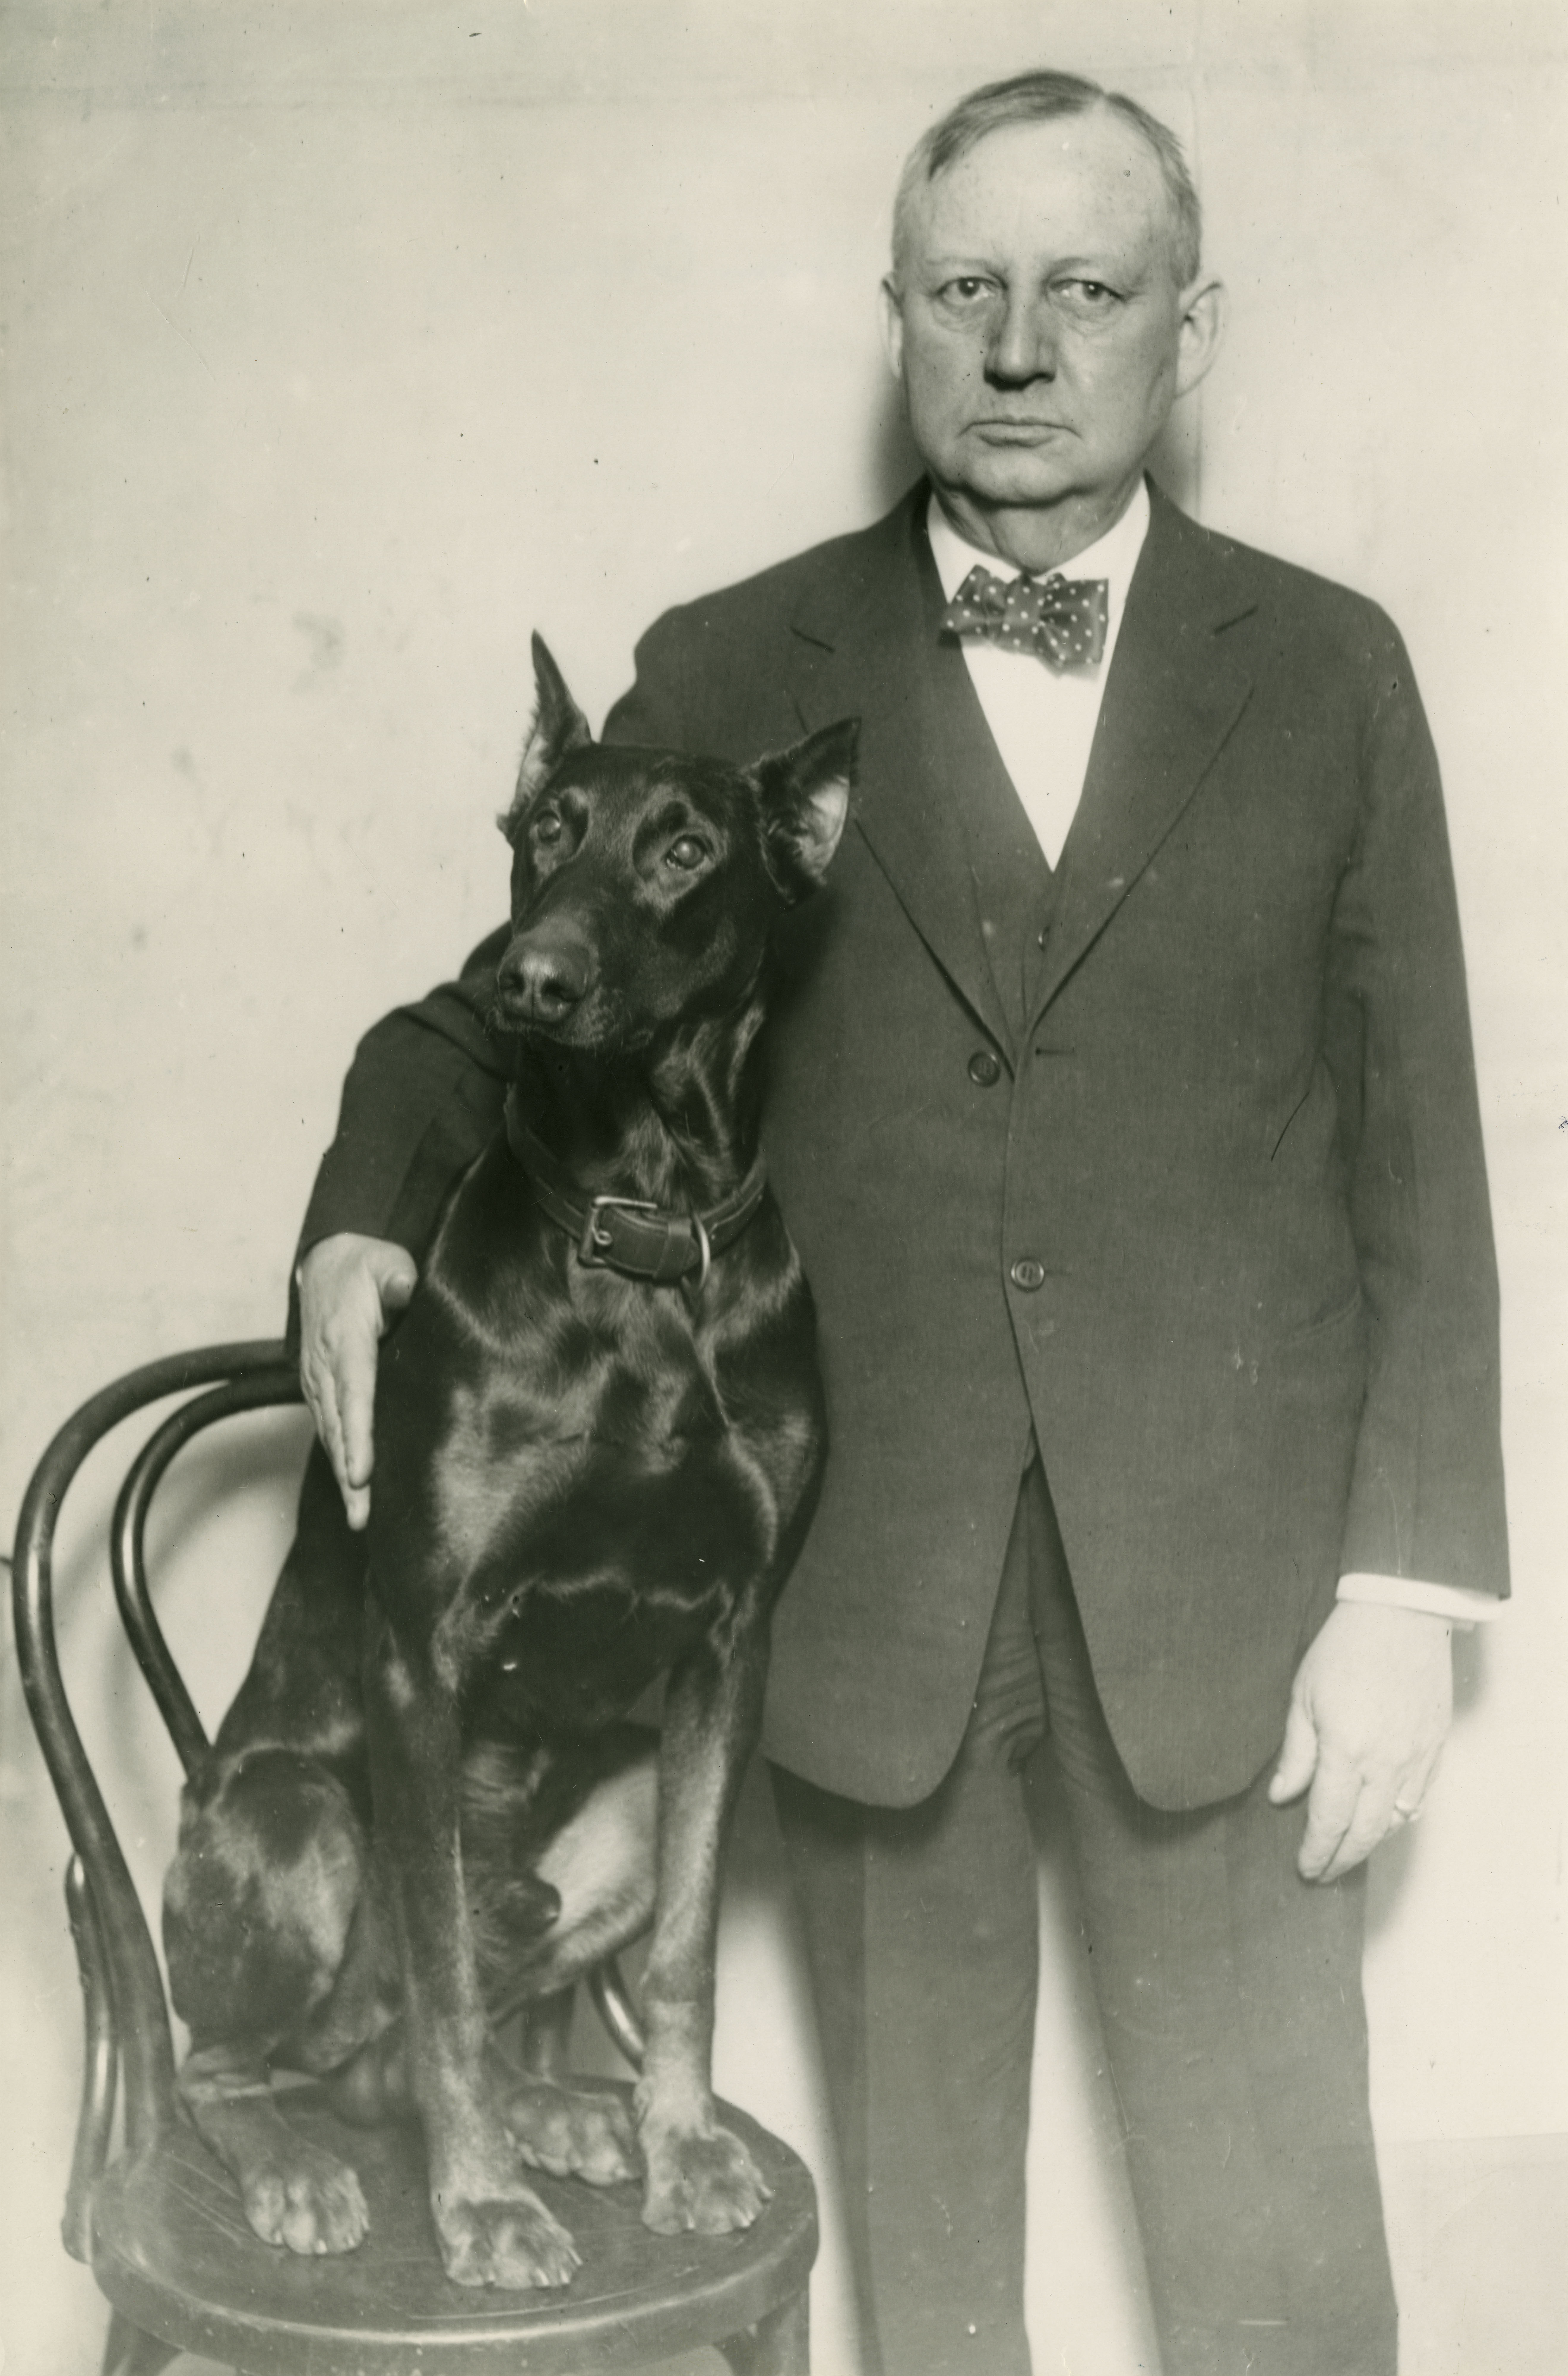 Harry Tammen with his dog Mox, 1924 [Courtesy Denver Public Library Western History Department]